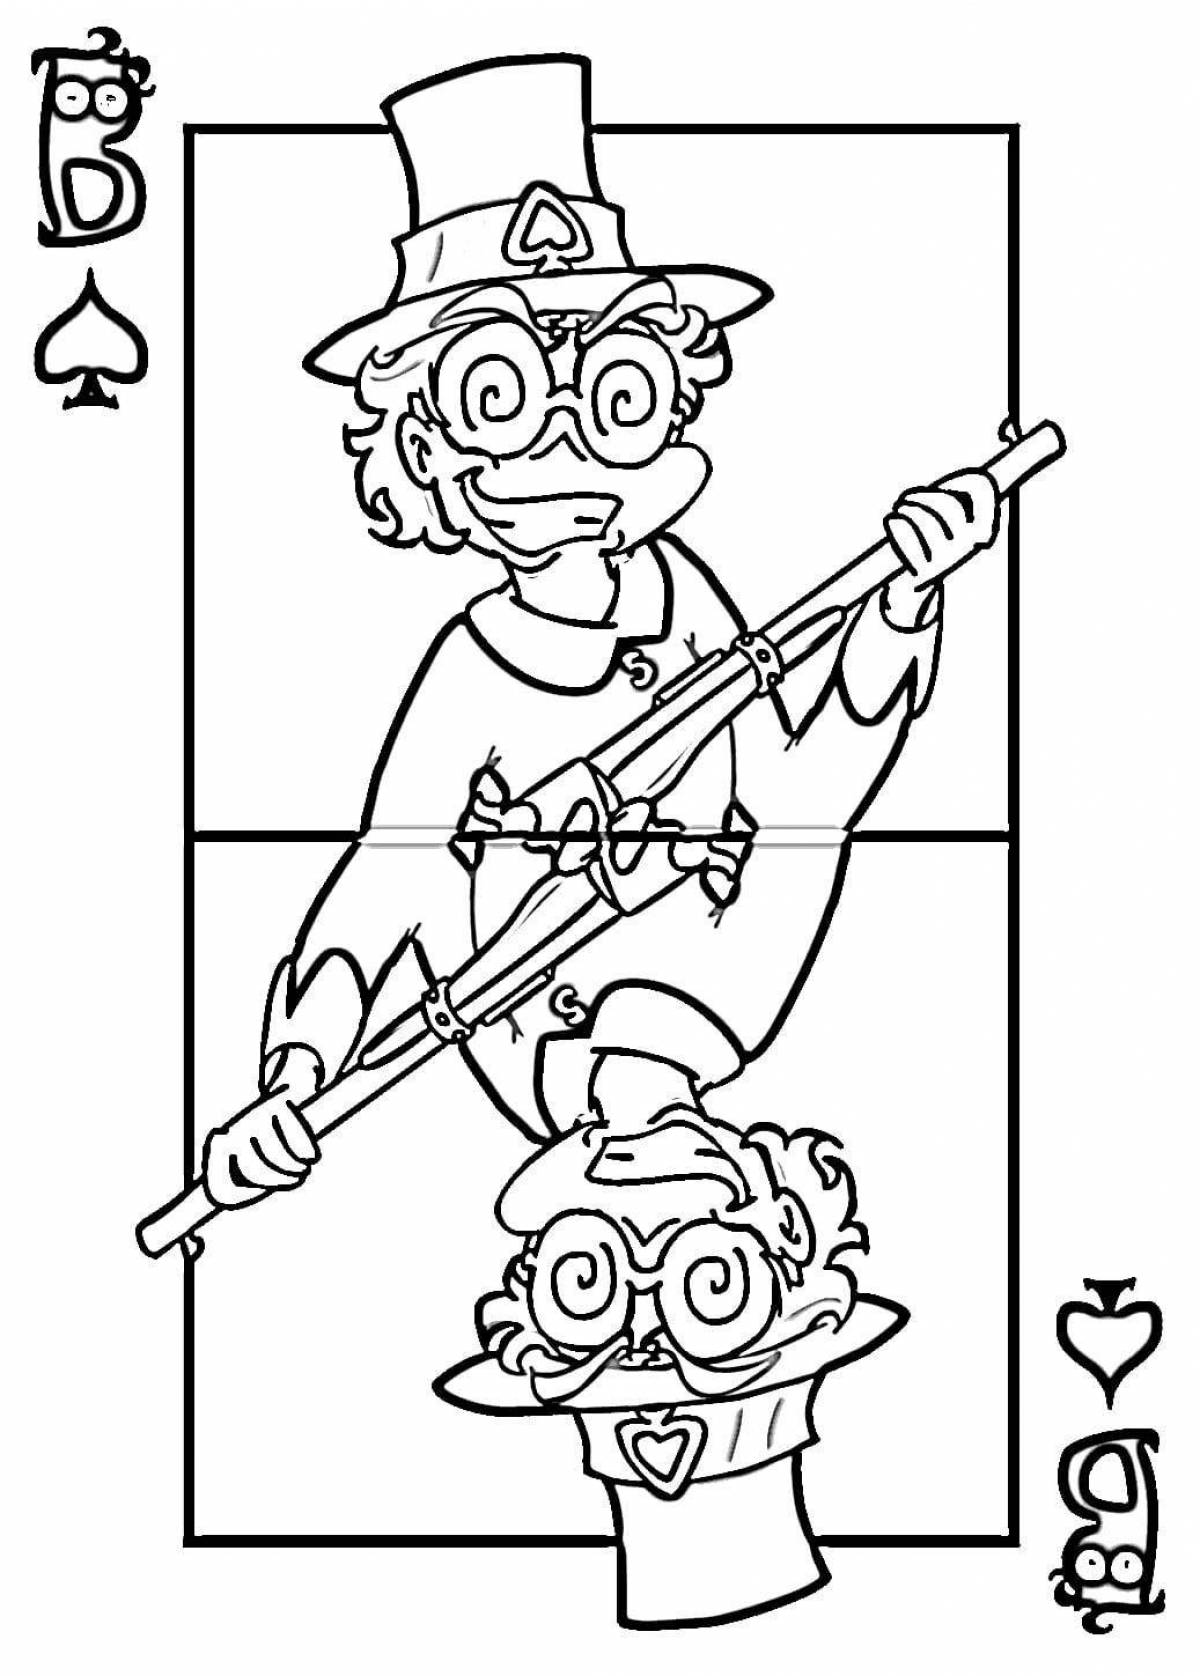 Brilliant coloring page 13 maps land of kings